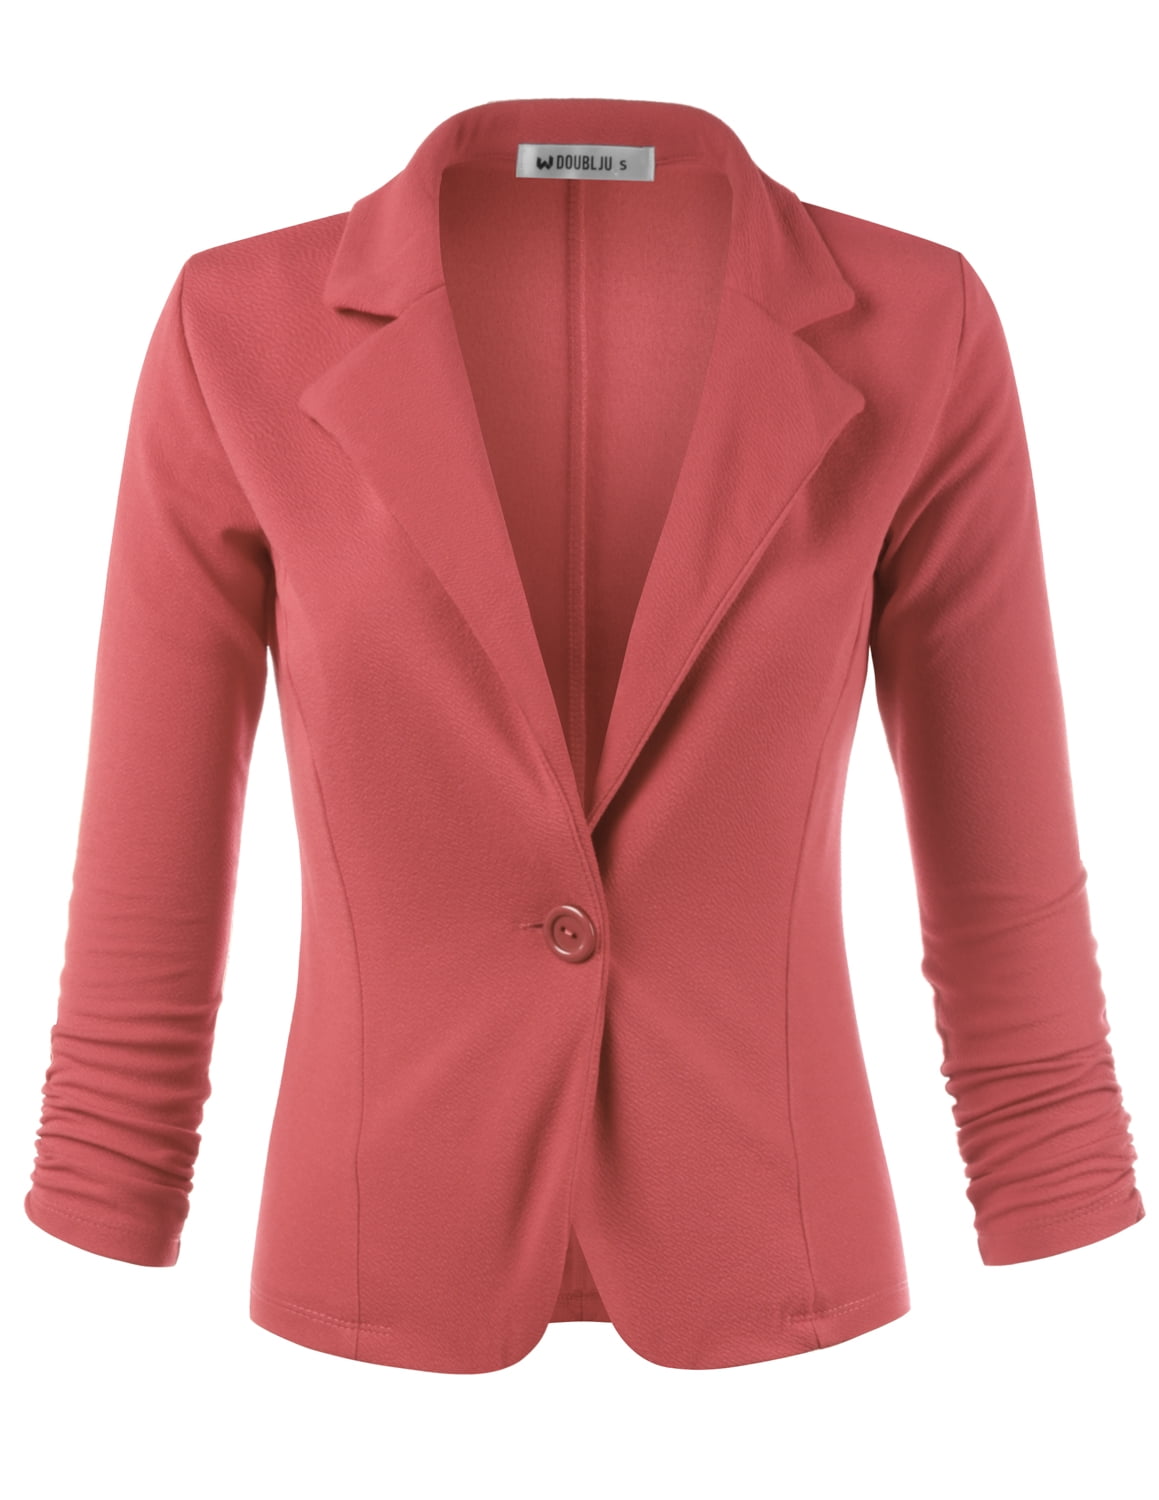 Doublju Women's Casual One Button Cropped Blazer with 3/4 Shirring Sleeve